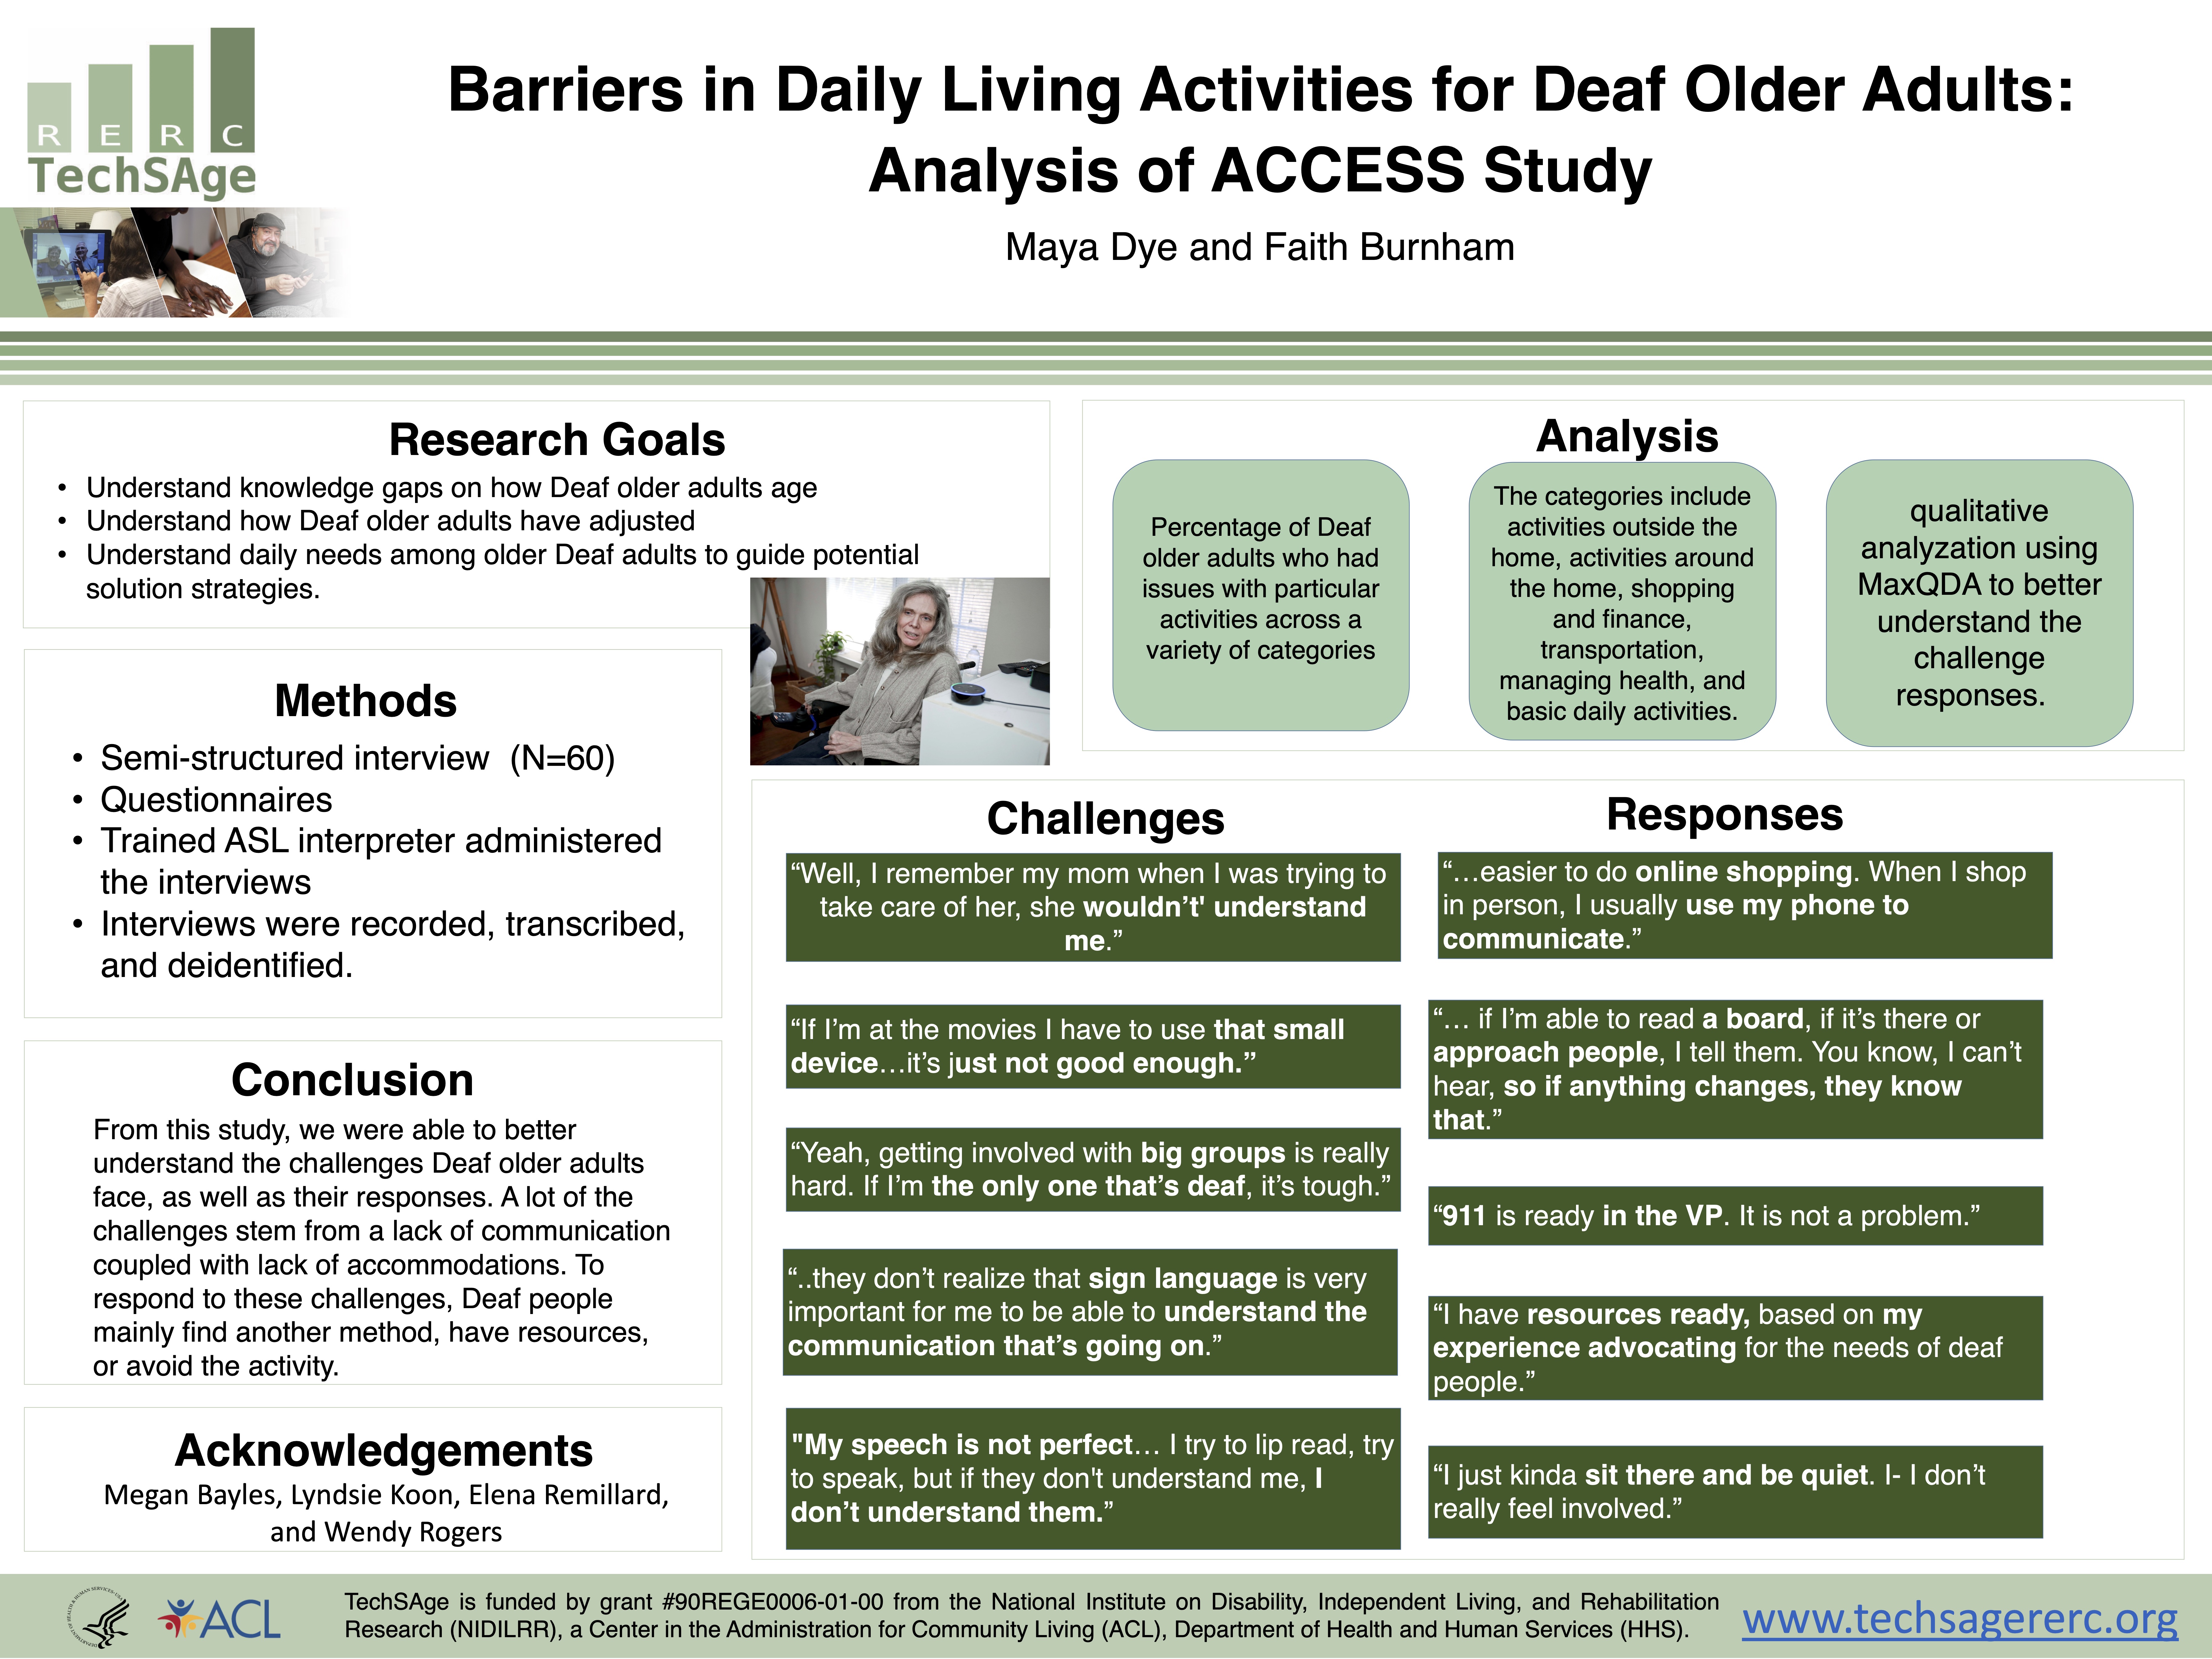 Screenshot of "Barriers in Daily Living Activities for Deaf Older Adults: Analysis of ACCESS Study" poster